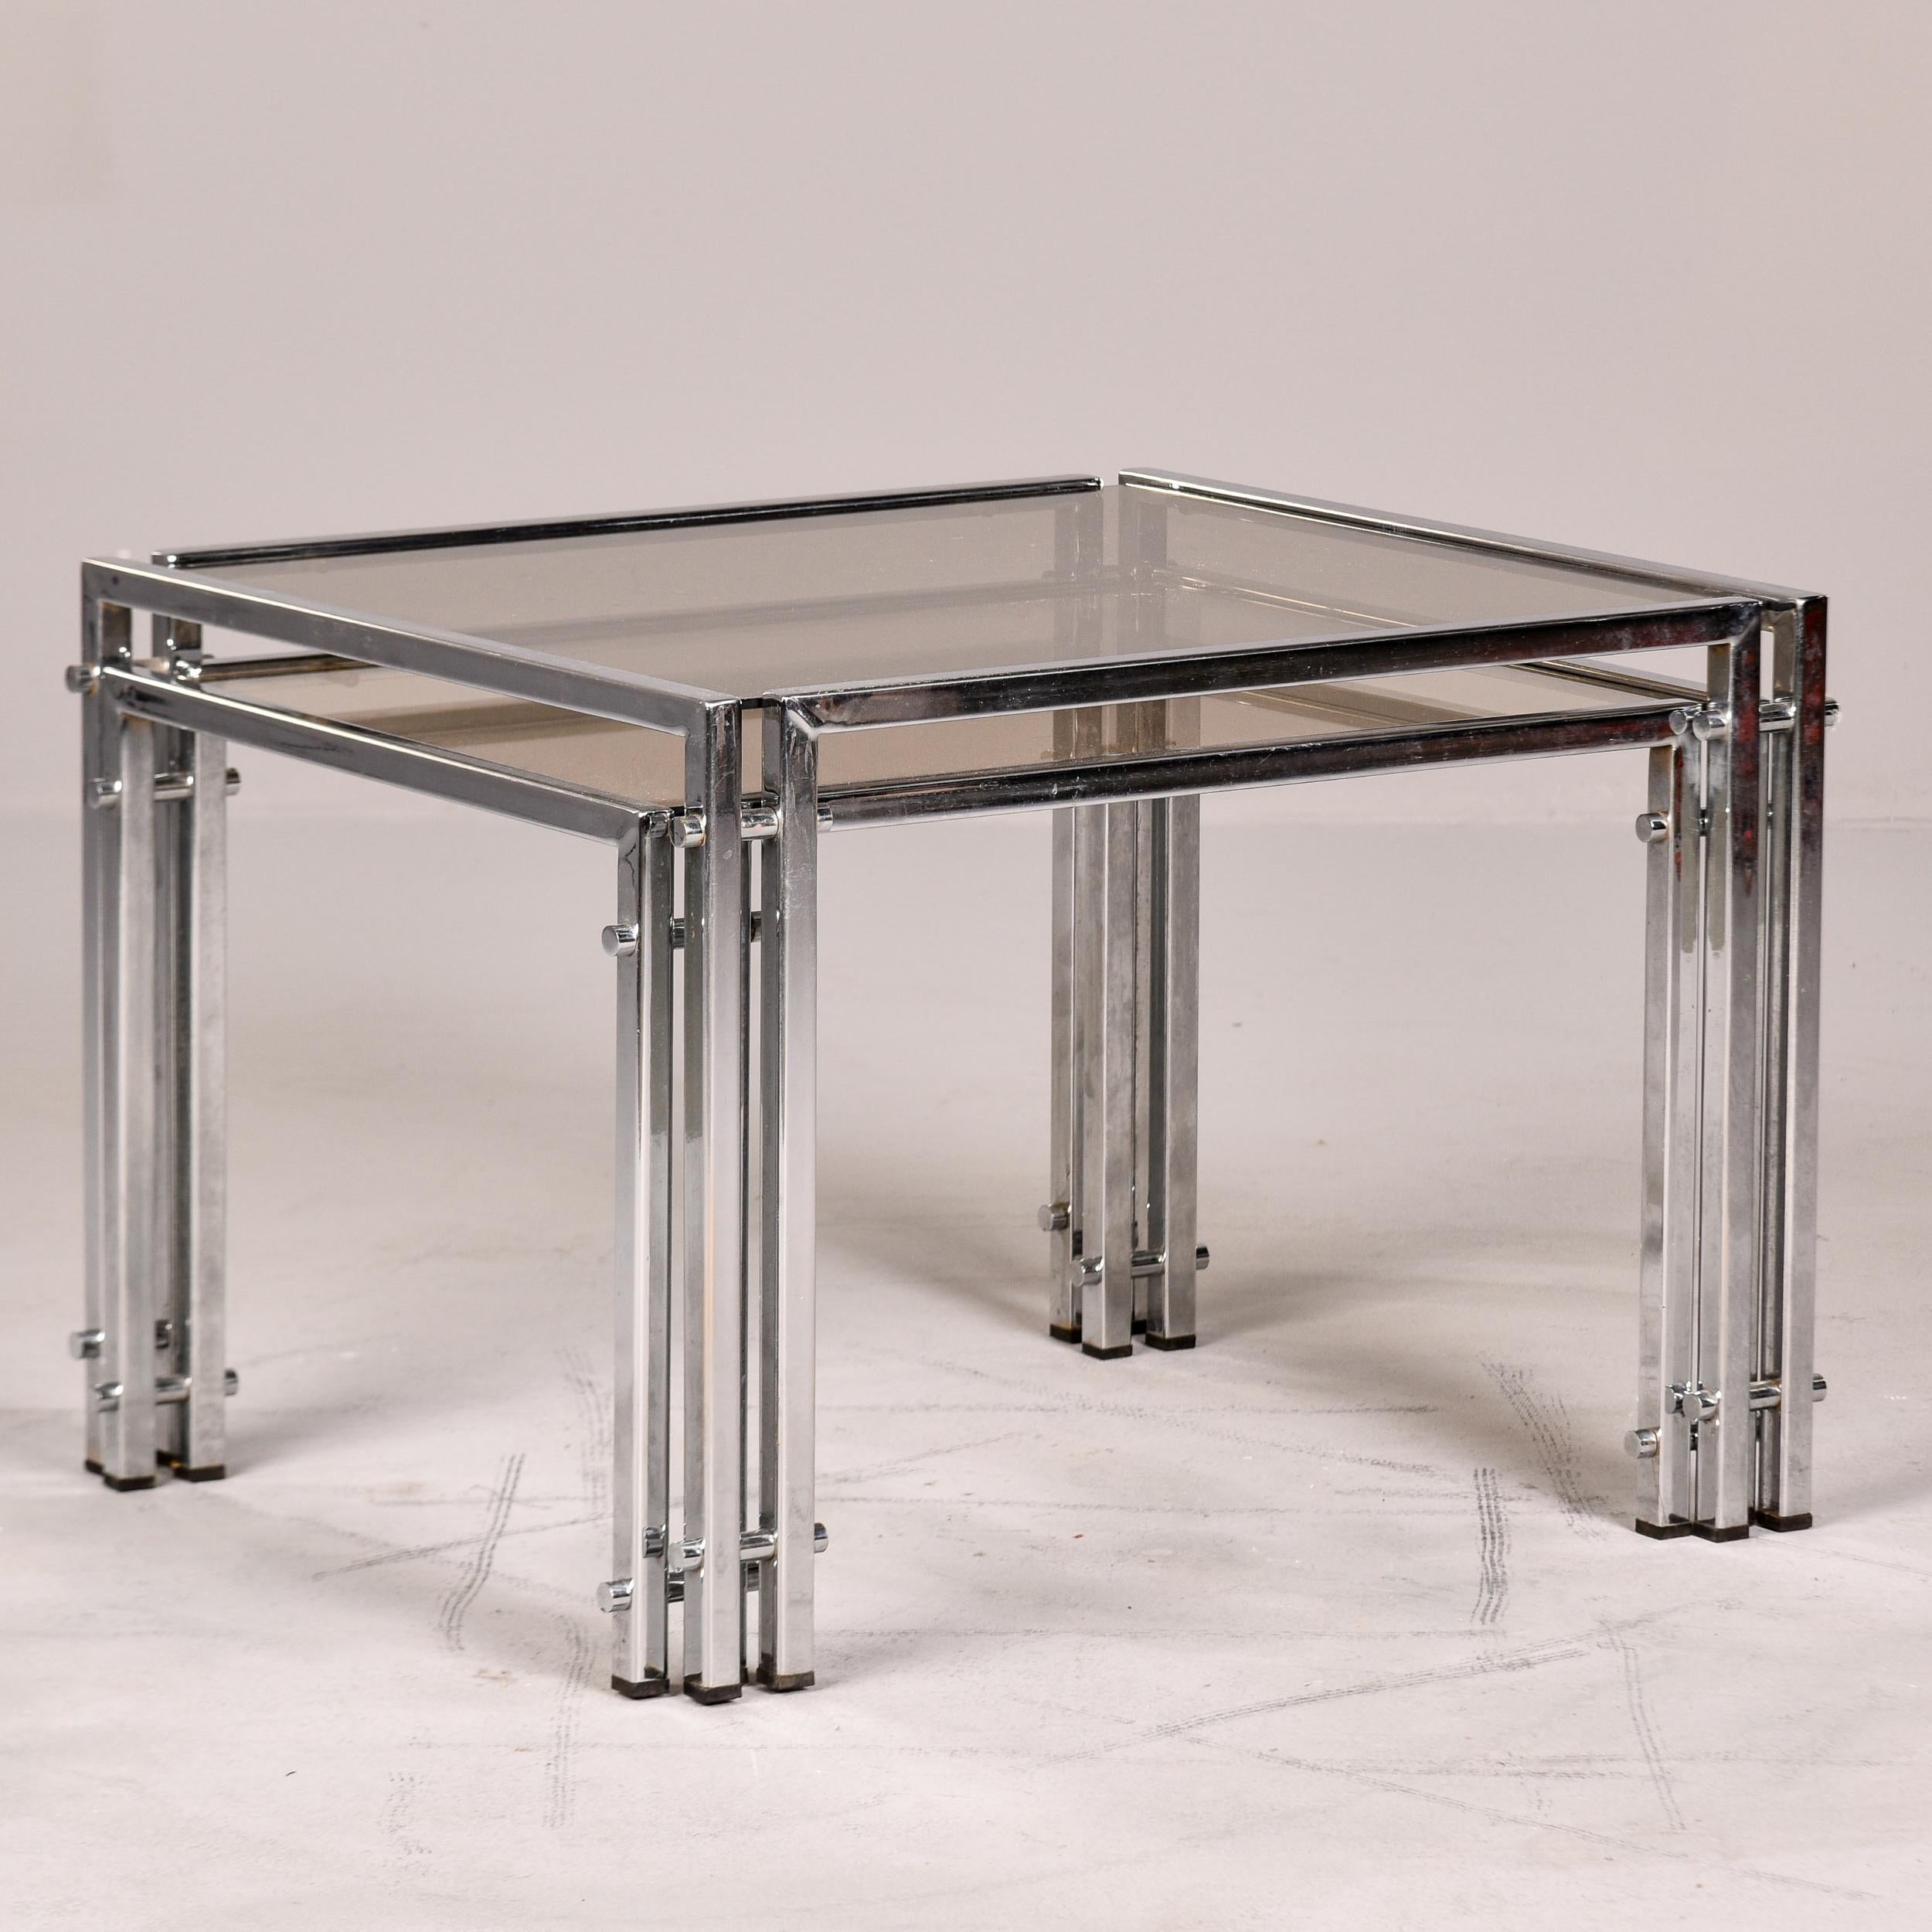 Set of Two Vintage Nesting Tables with Chrome Frames and Pale Smoke Glass Tops In Good Condition For Sale In Troy, MI